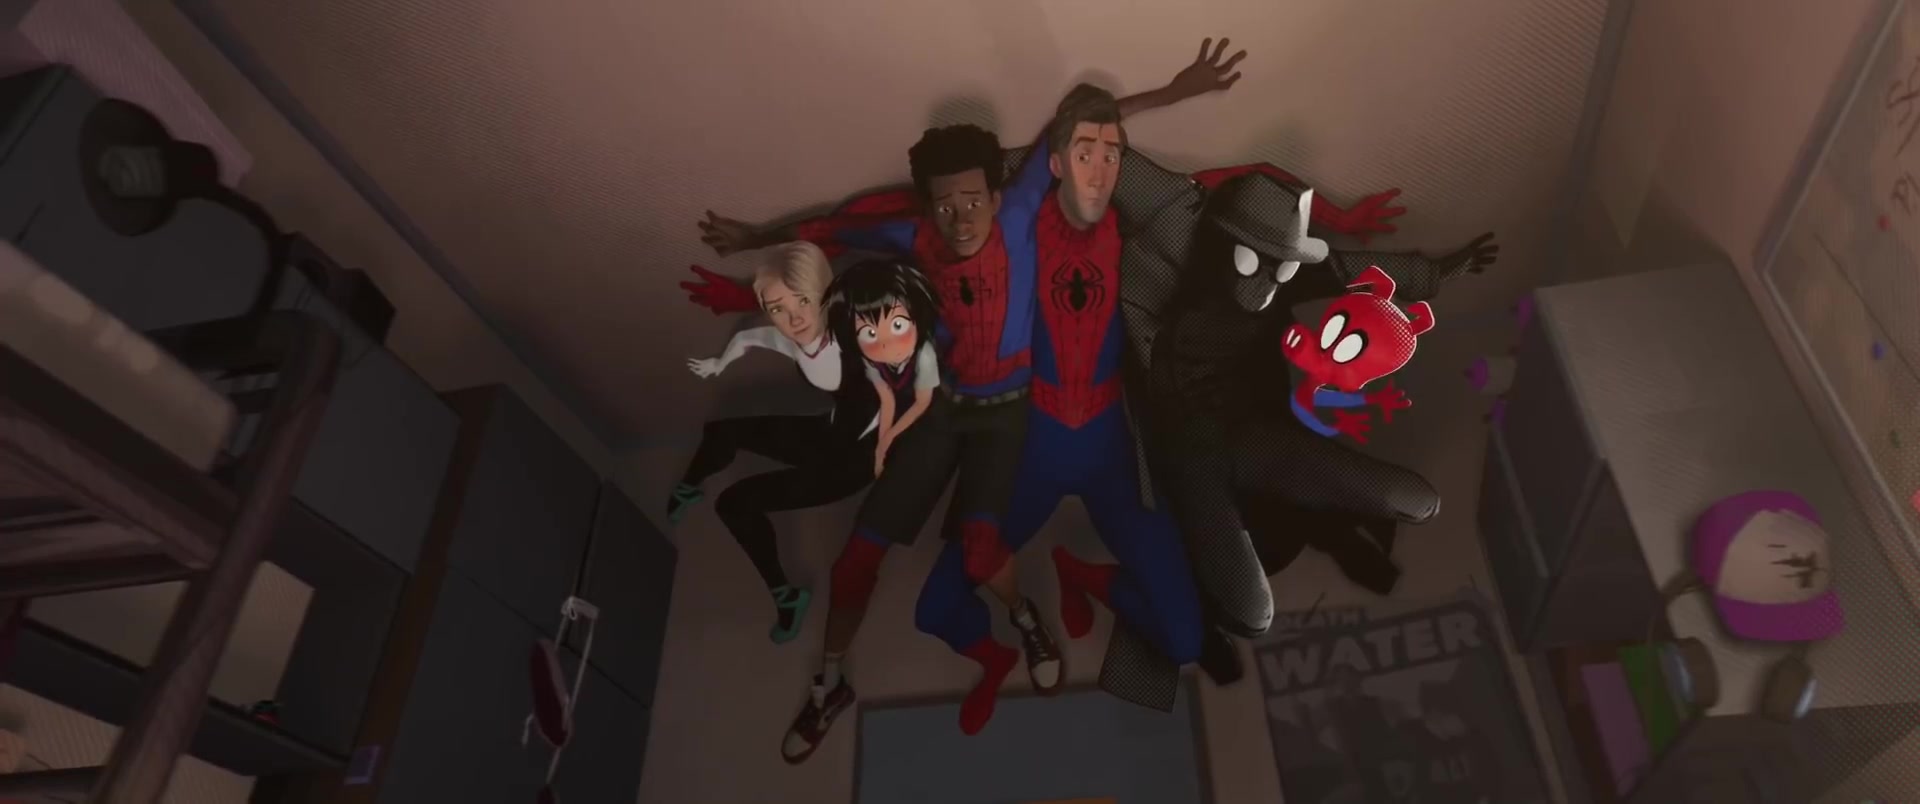 Gwen Stacy, Peni Parker, Miles Morales, Peter B. Parker,  Spider-Noir, and Spider-Ham in Spider-Man: Into the Spider-Verse (2018). 